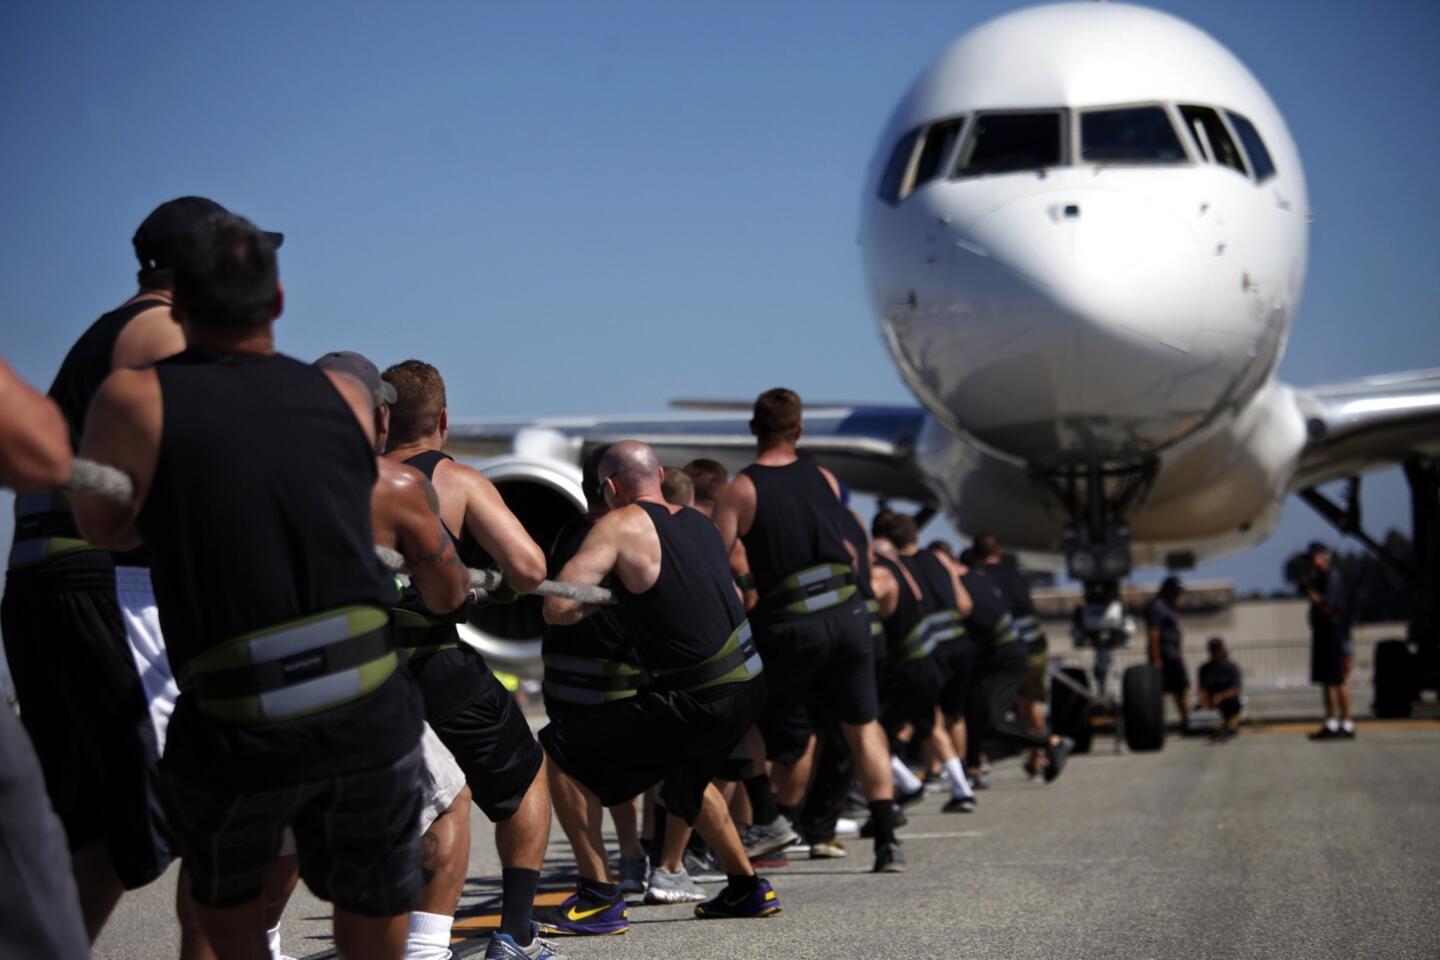 The Men's Central Jail team pulls a 164,000-pound Boeing 757 airplane as part of the ninth Annual Special Olympics Southern California's Plane Pull at the Long Beach Airport.